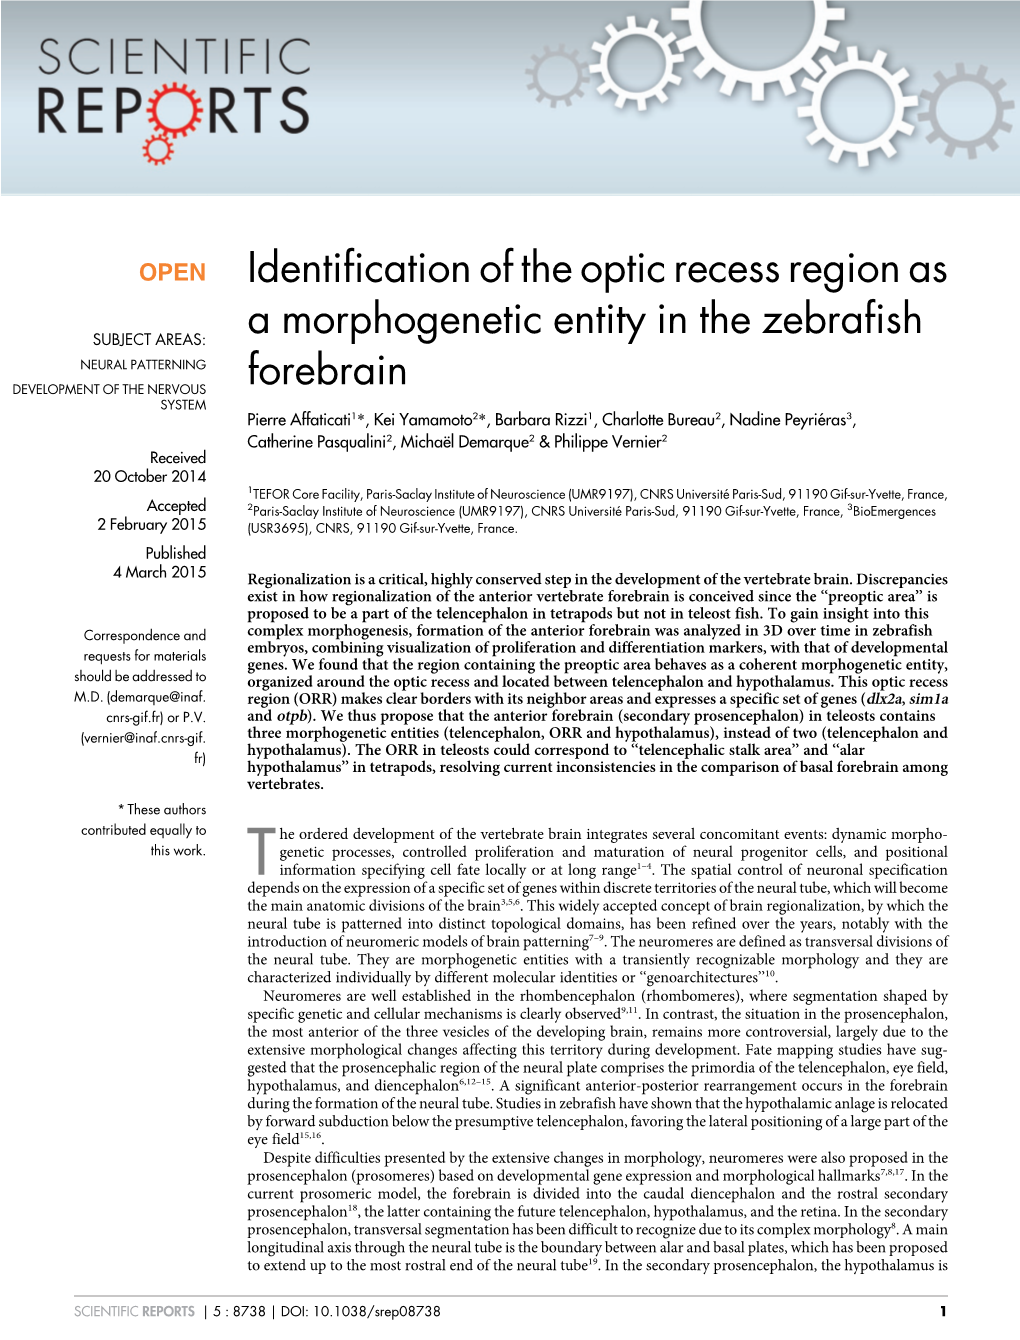 Identification of the Optic Recess Region As a Morphogenetic Entity in The